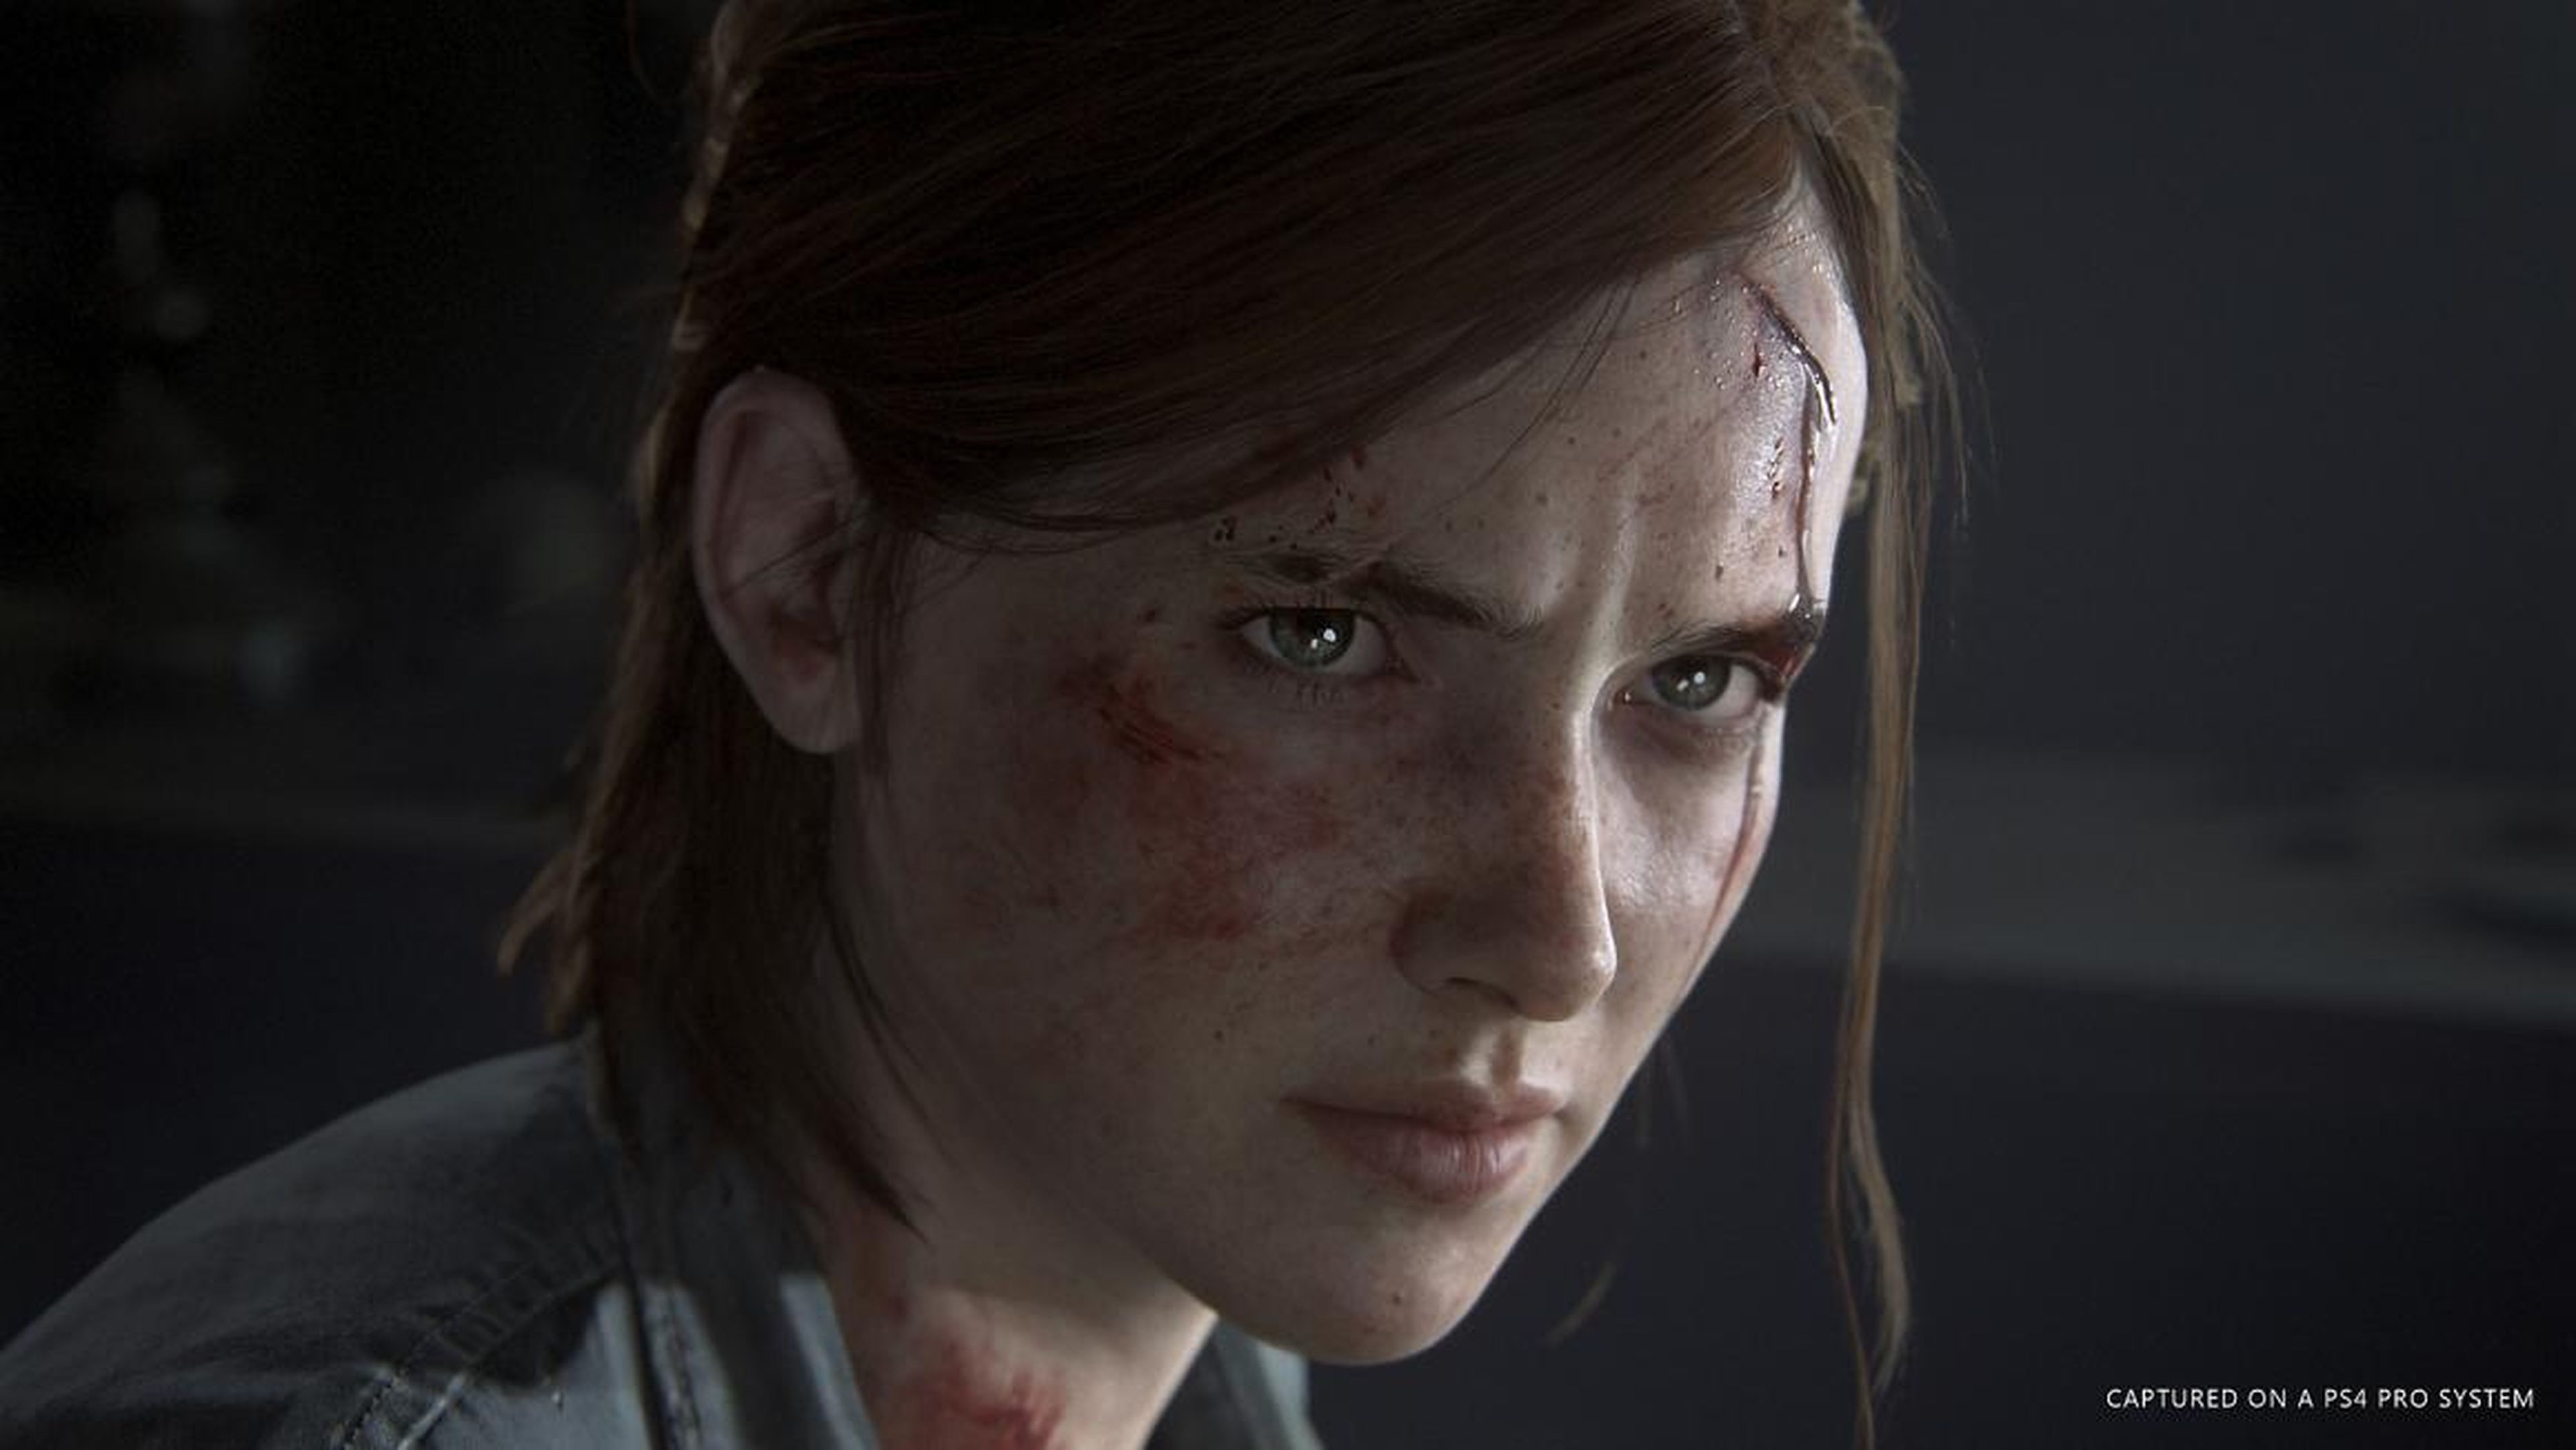 Ellie, the teenage girl who needed protection in the original "The Last of Us," is now the game's main character. "Part II" follows a 19-year-old Ellie five years after the conclusion of the first game.